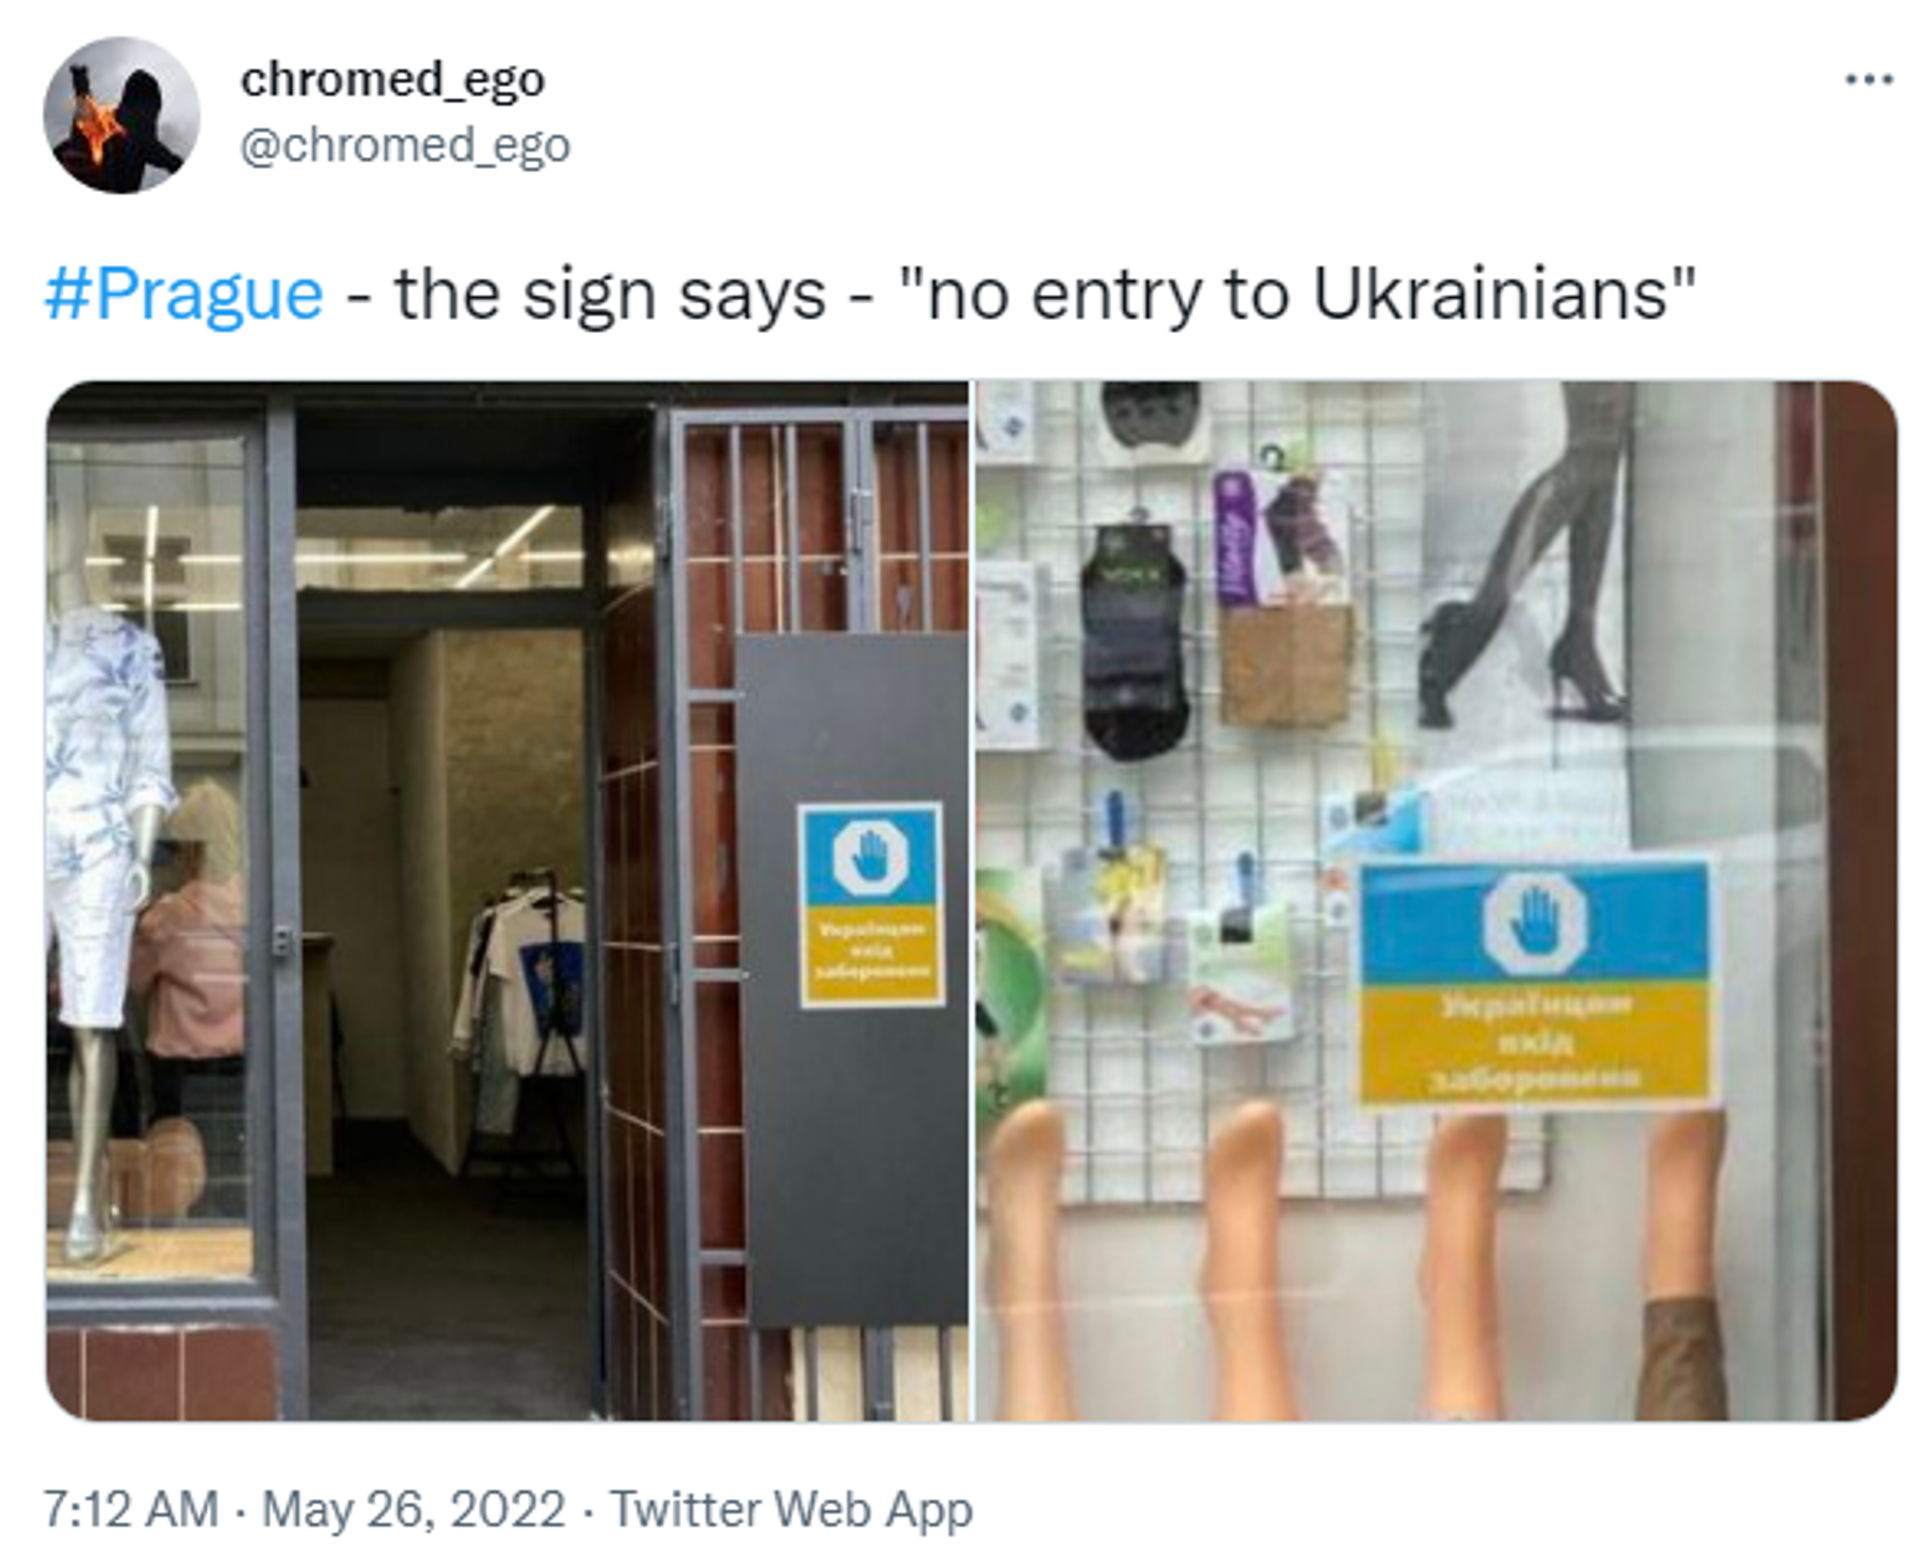 Tweeted images of No entry to Ukrainians signs outside shops in the Czech capital Prague - Sputnik International, 1920, 26.05.2022